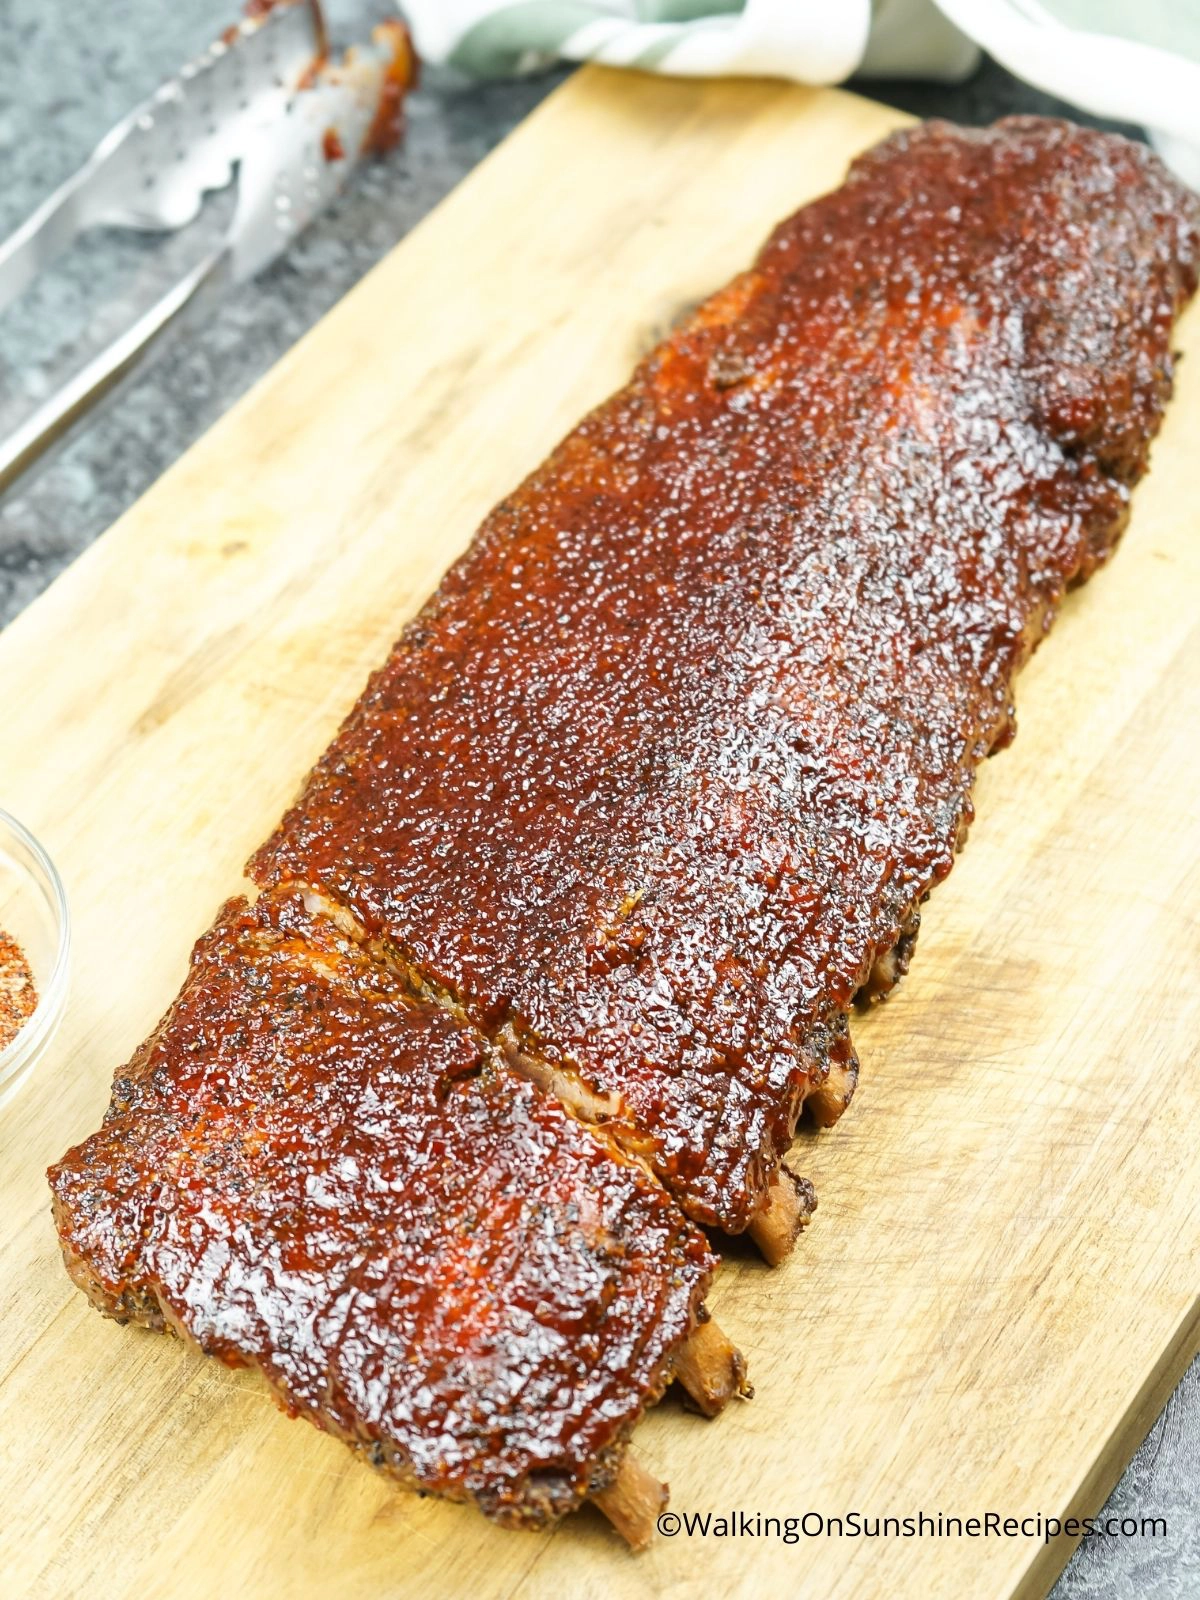 Oven baked ribs on cutting board